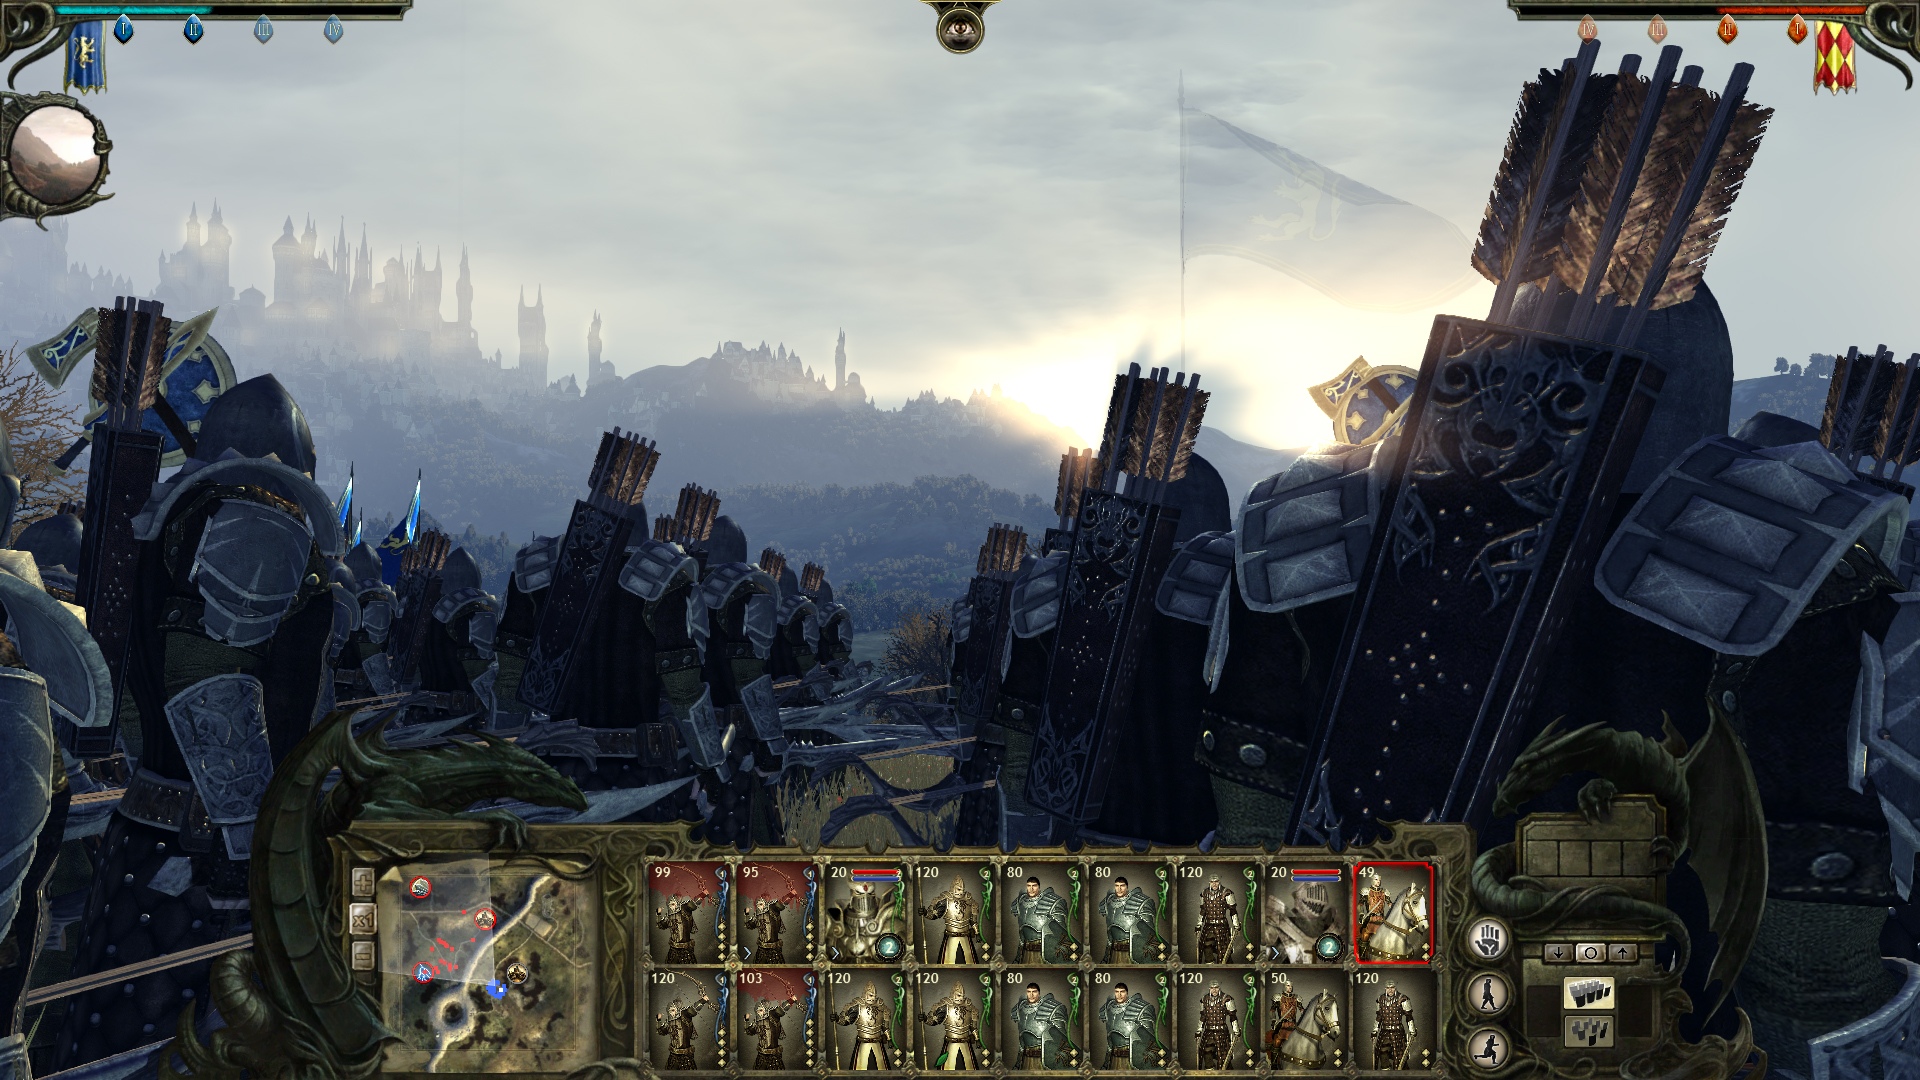 Kings game 2. Игра King Arthur the role-playing Wargame. King Arthur 2 Септимус Сулла.